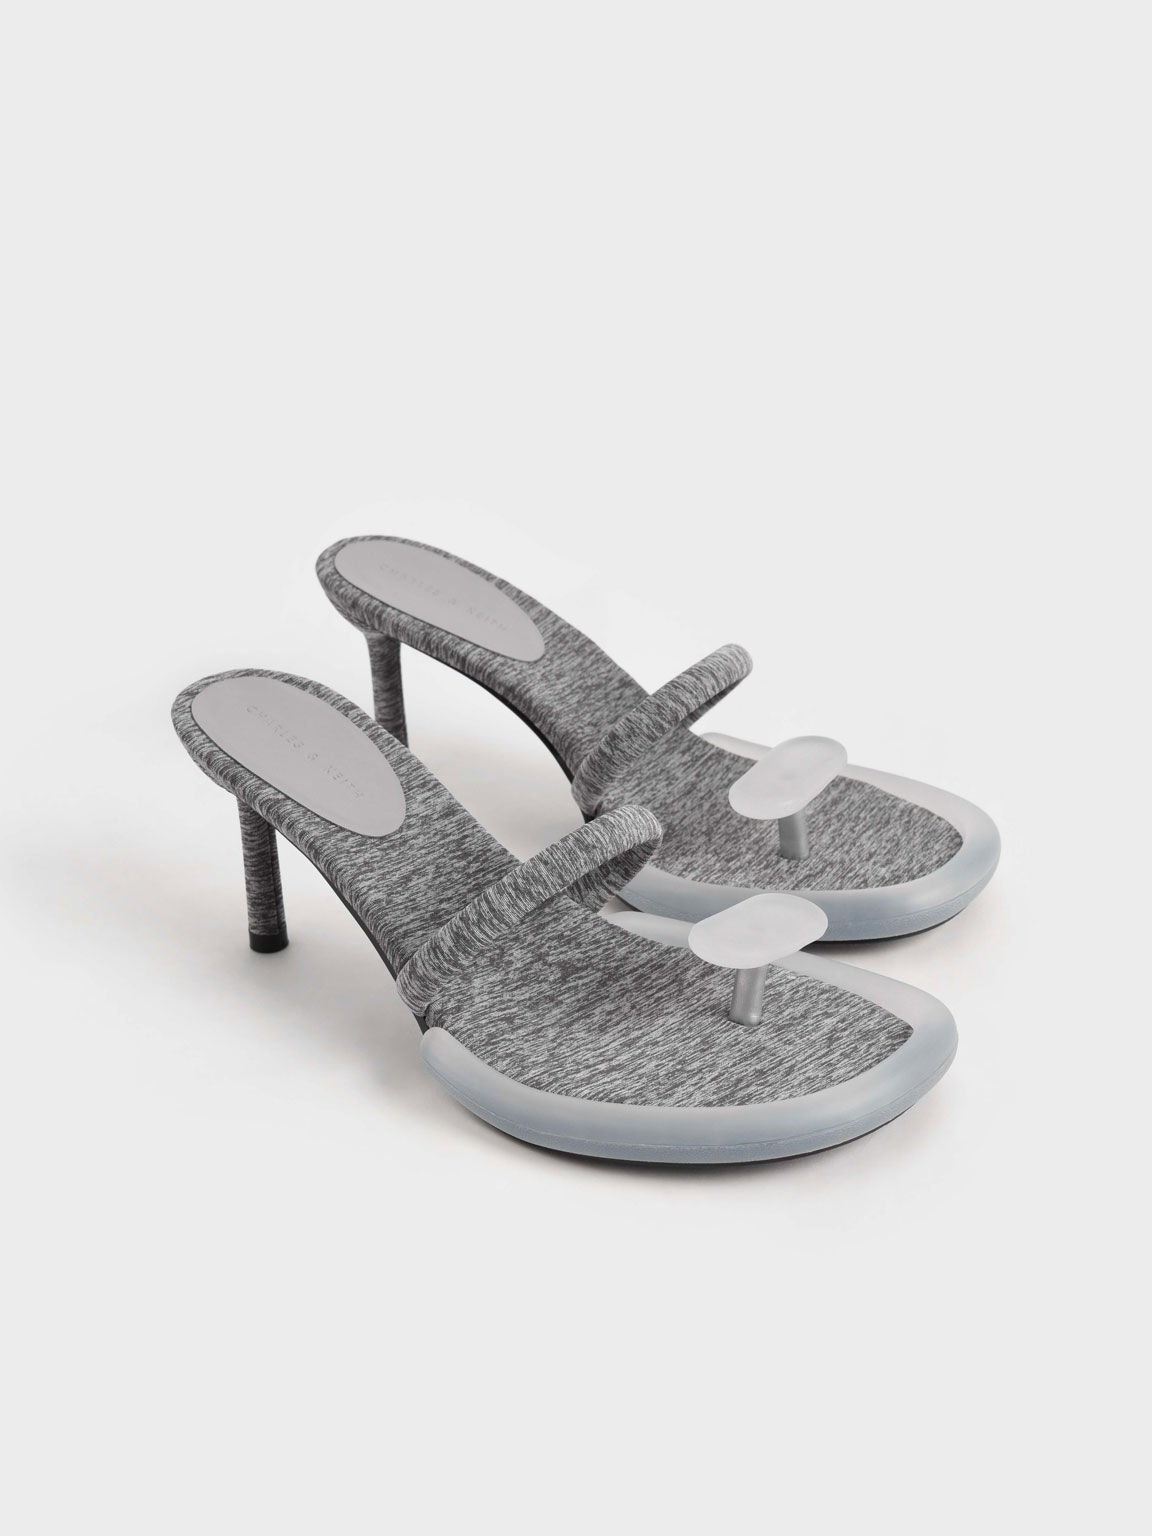 Sandal Thong Electra Recycled Polyester Heeled, Light Grey, hi-res